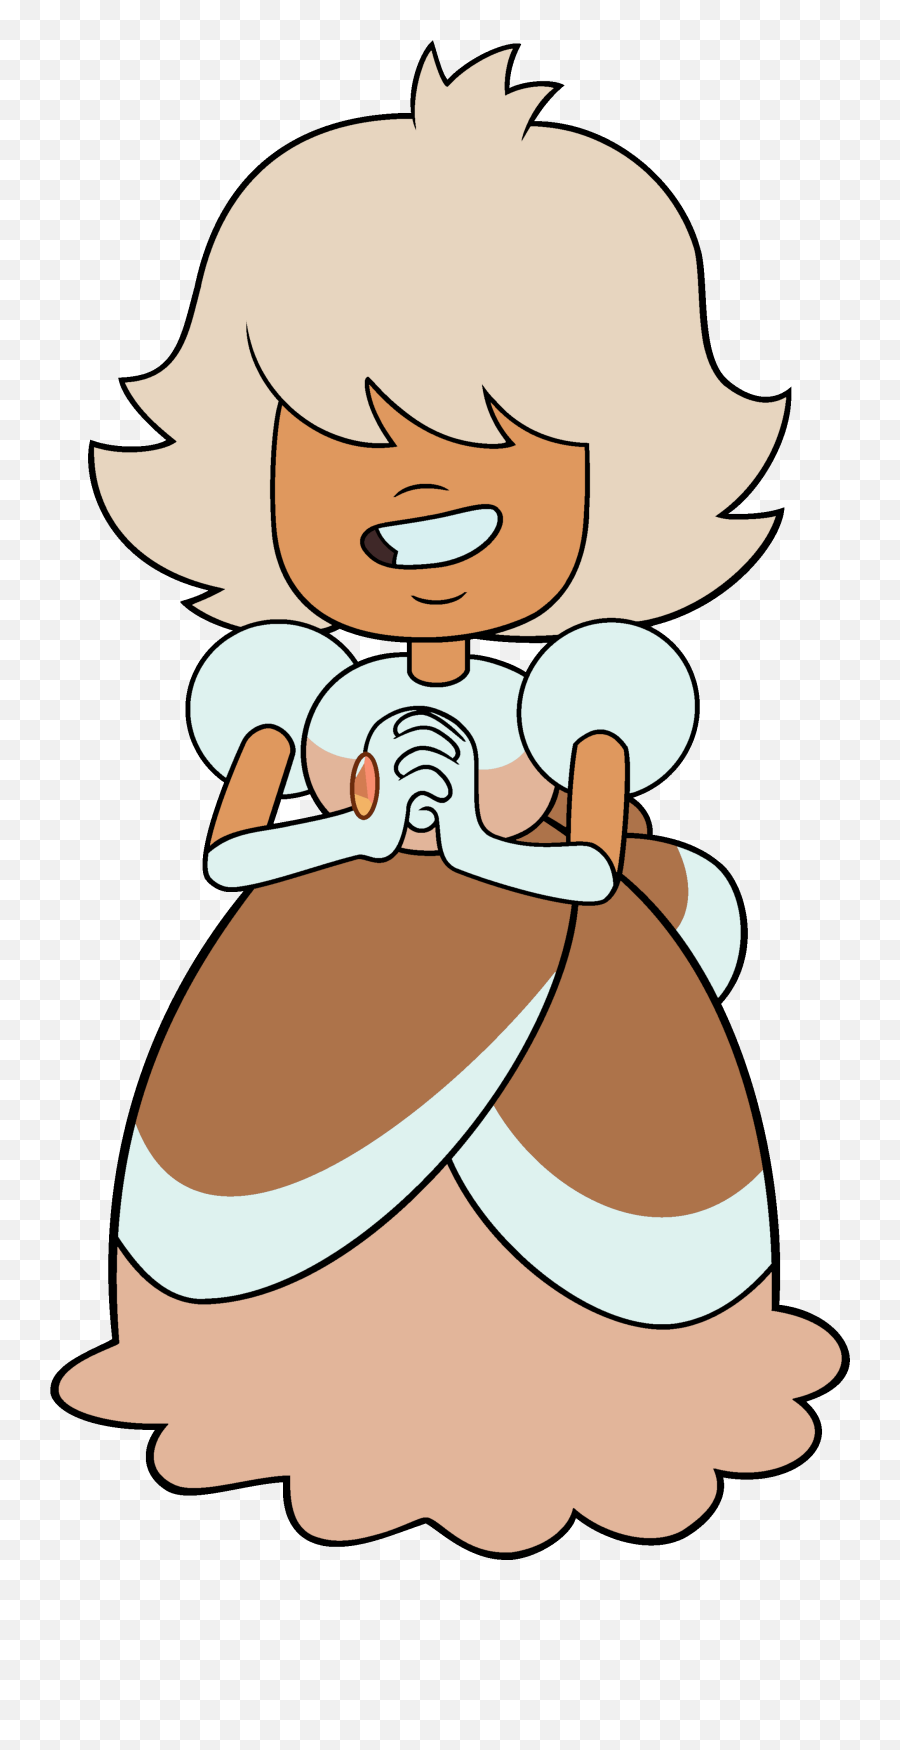 Everyone Get Ready The Episodes Are About To Start - Padparadscha Steven Universe Emoji,Steven Universe Poof From Emotion